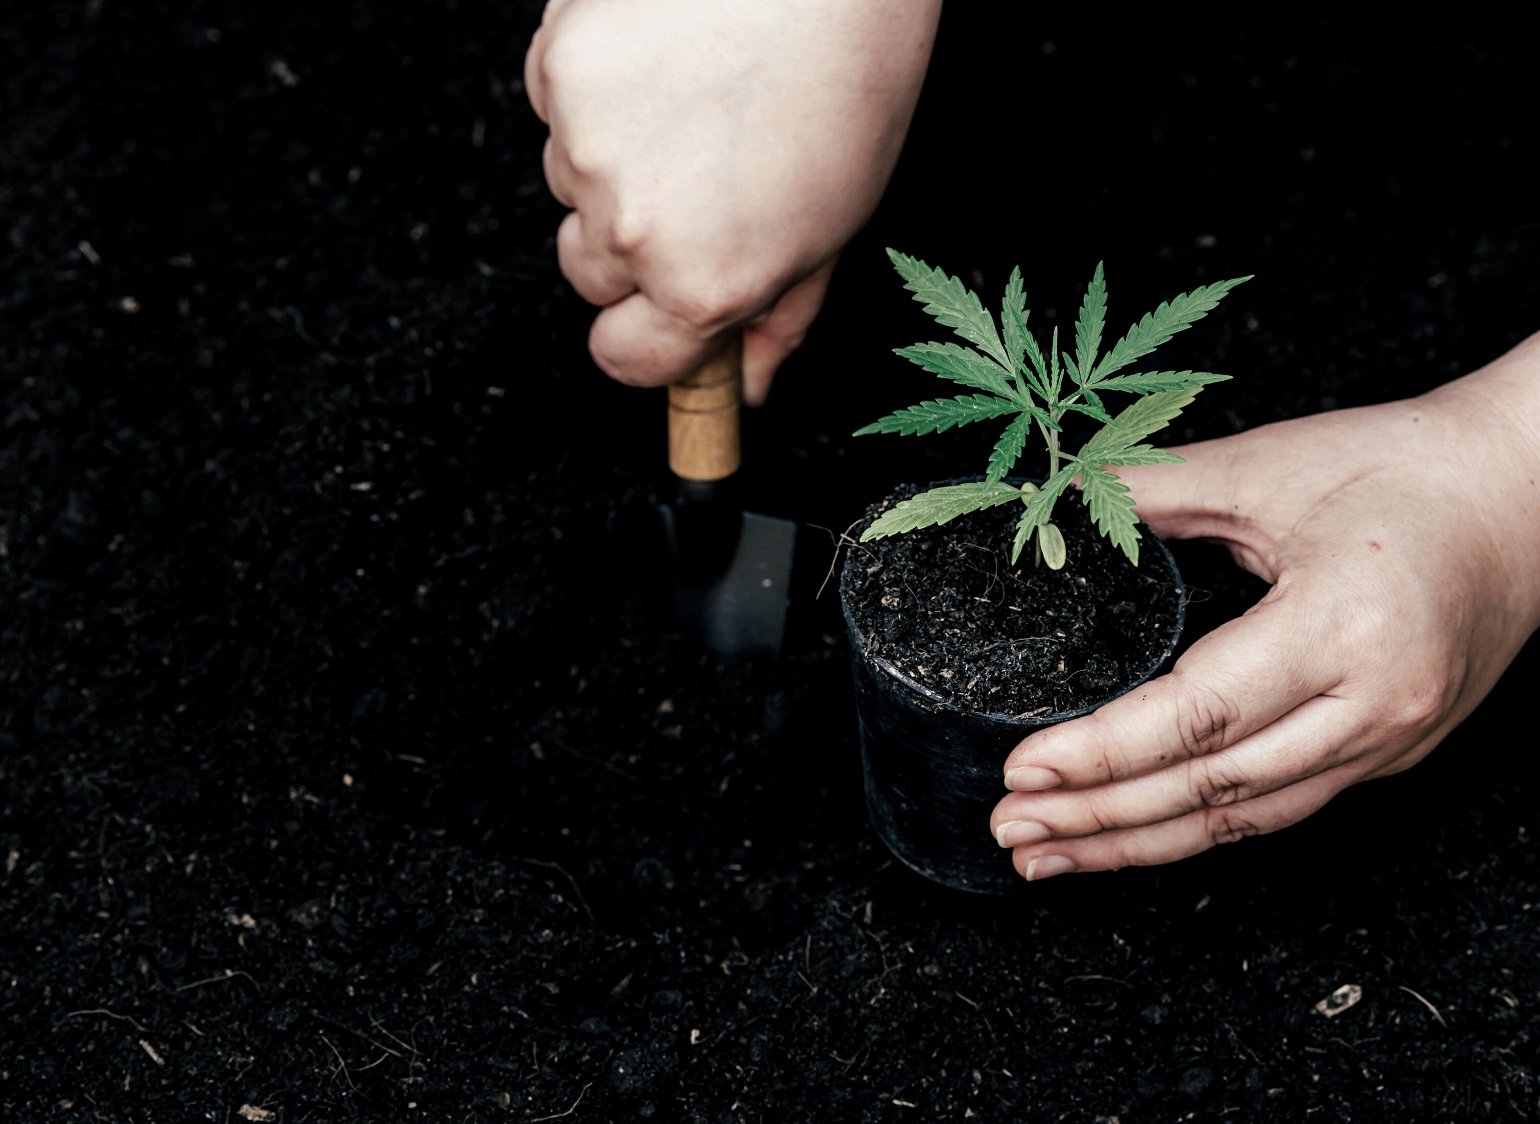 Learn how to cultivate cannabis outdoors with this comprehensive guide. From selecting the right strain for your climate to preparing the soil and managing pests, this resource covers every step of the outdoor growing process.